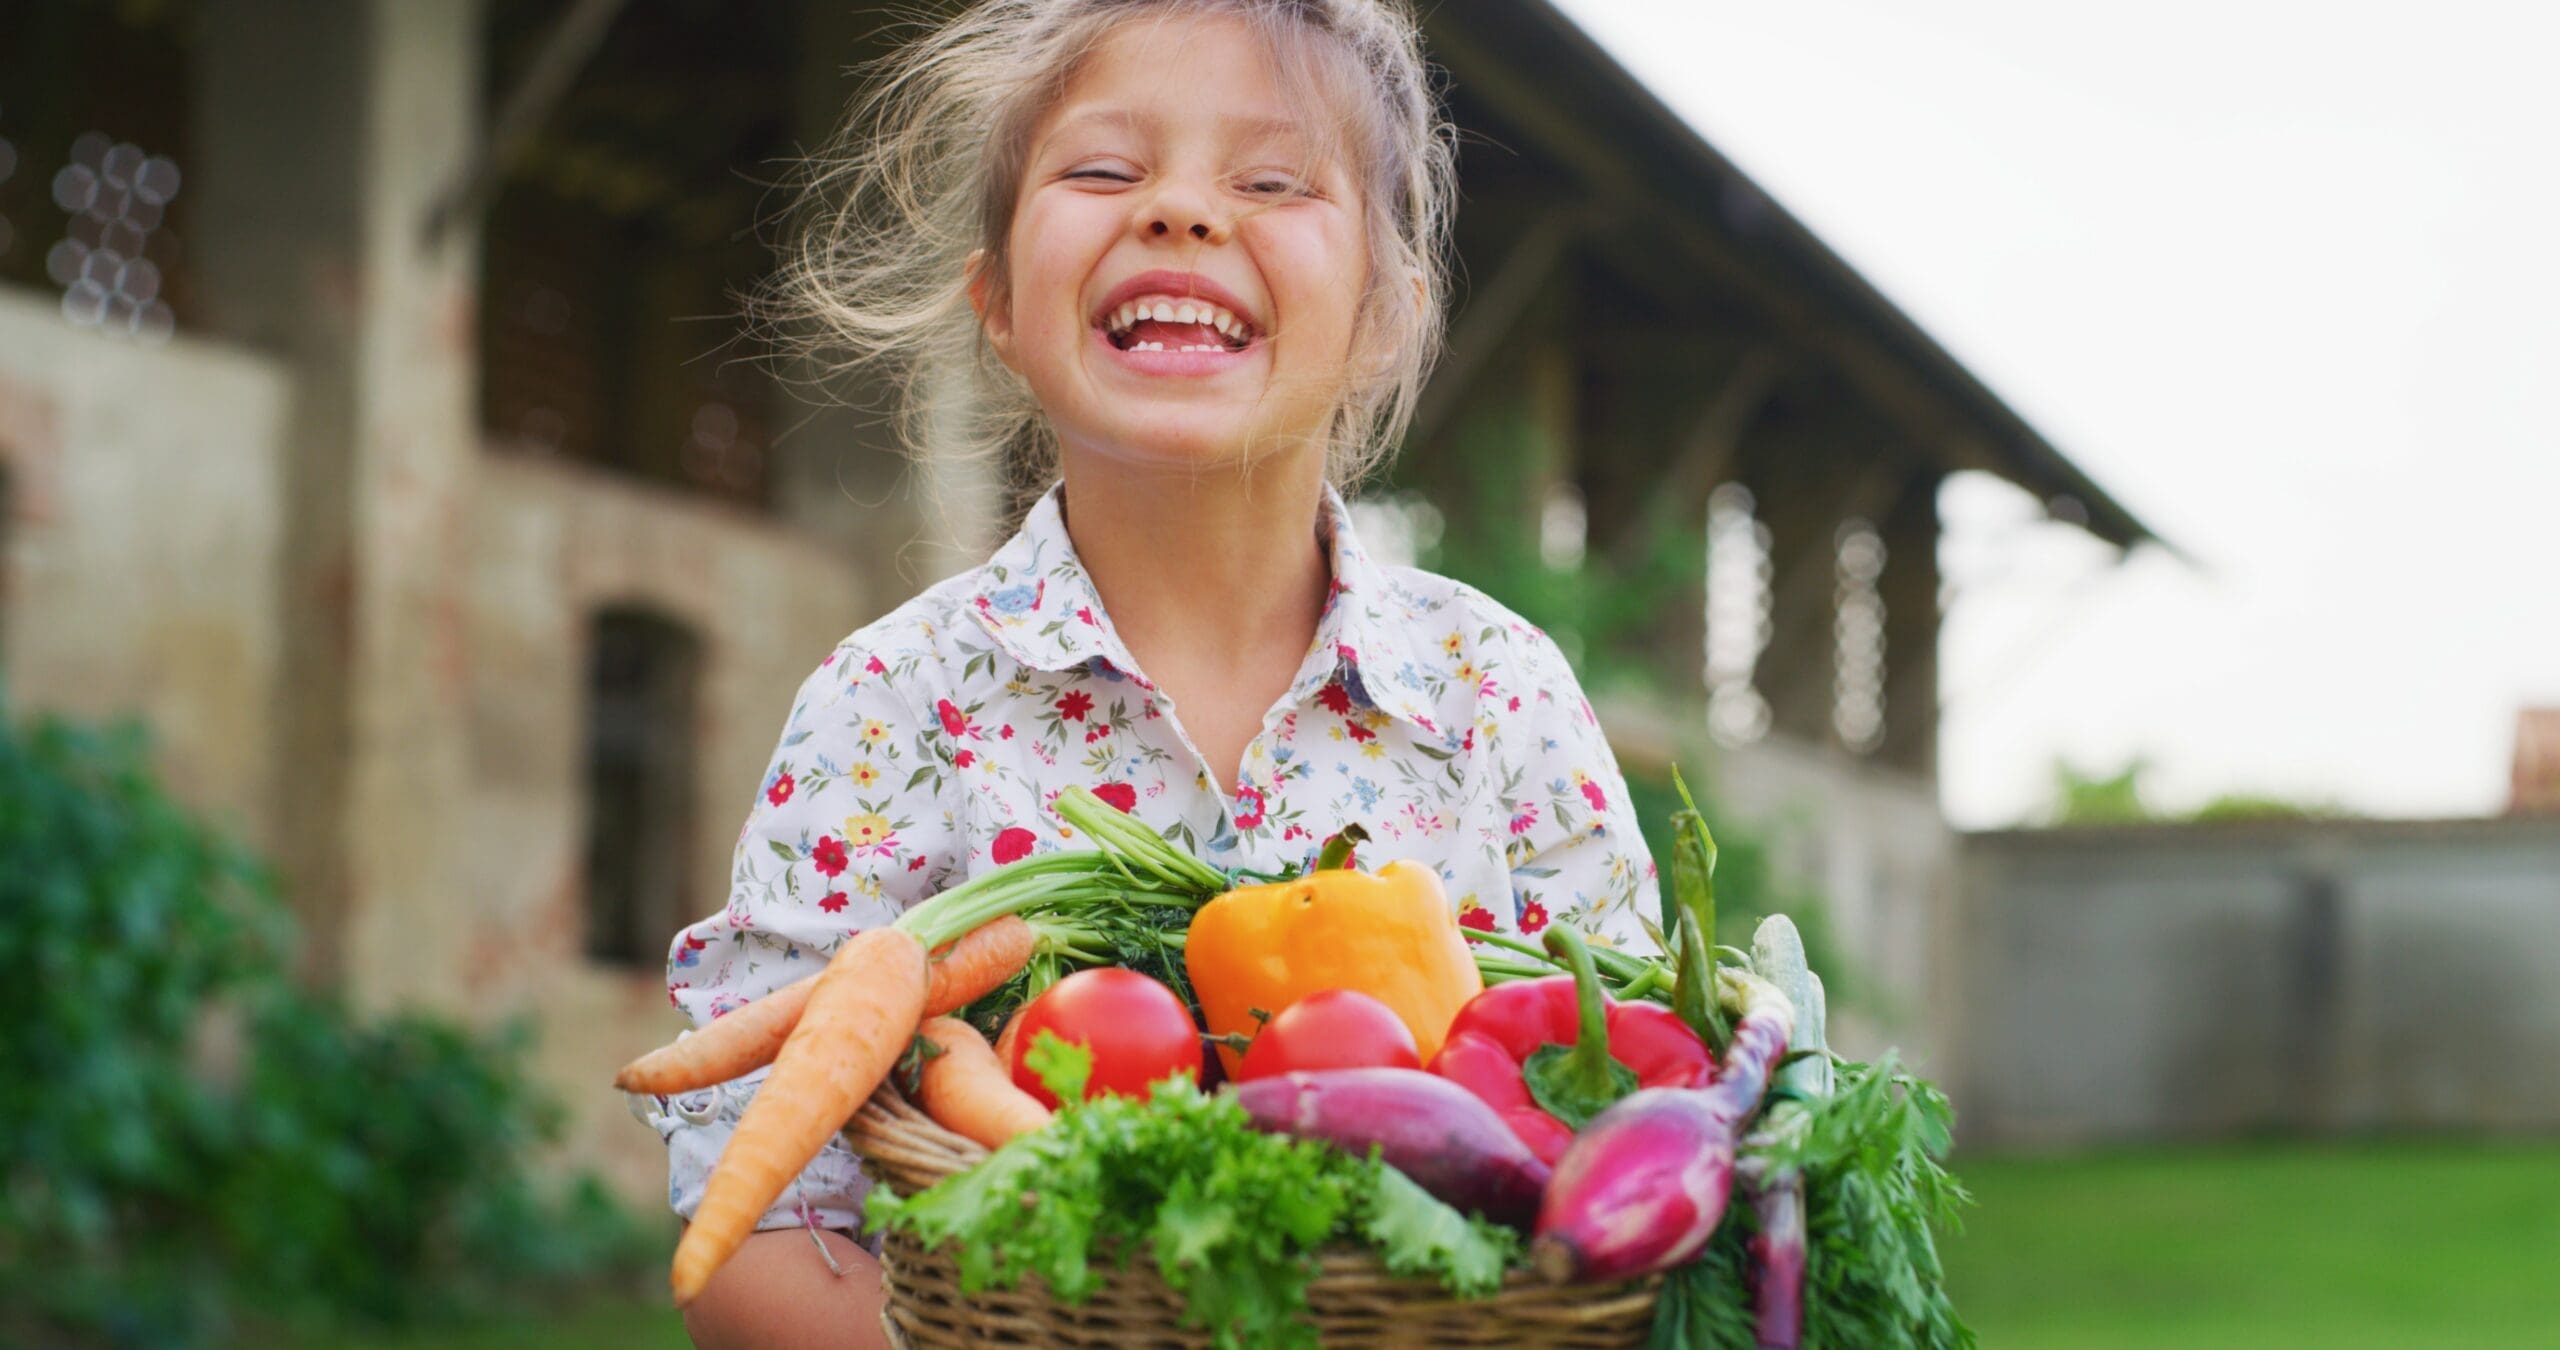 How to get kids to eat vegetables?